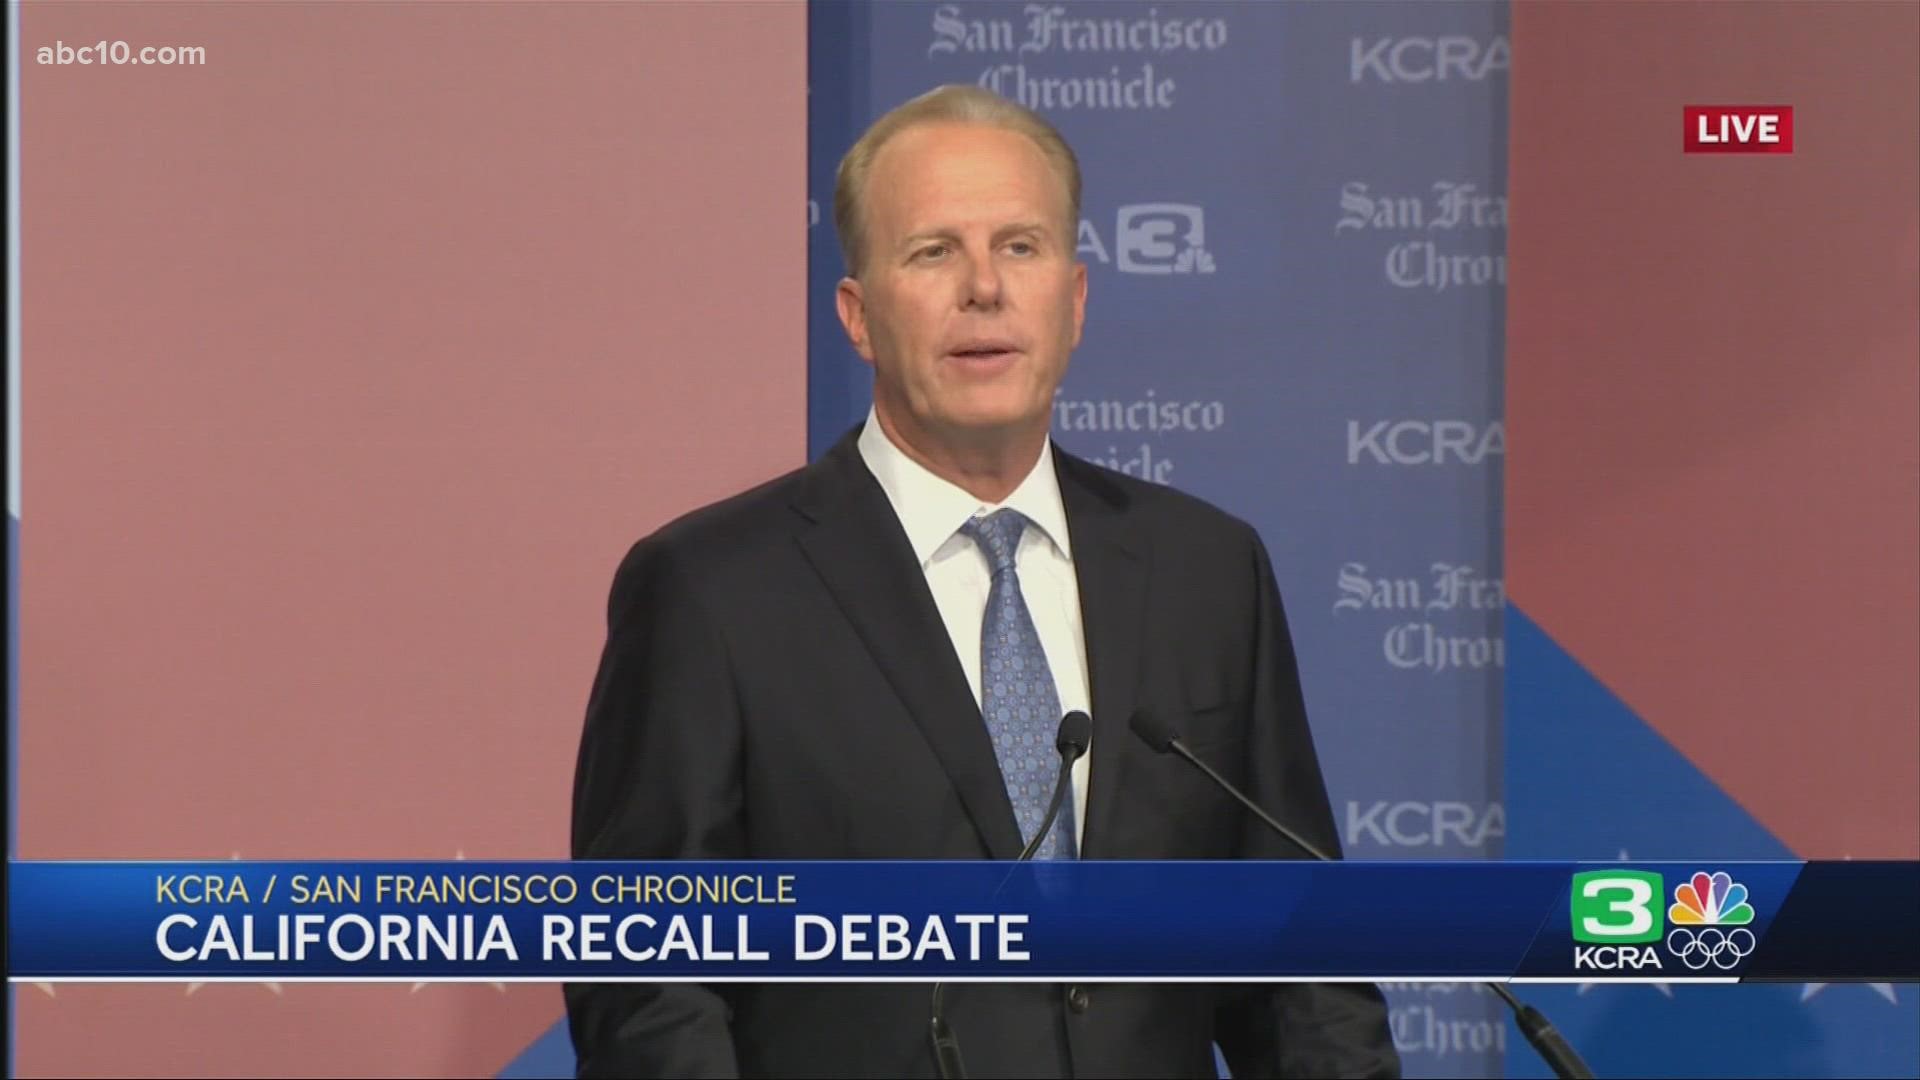 A democrat joined the debate for the first time, but it wasn't Gov. Newsom.